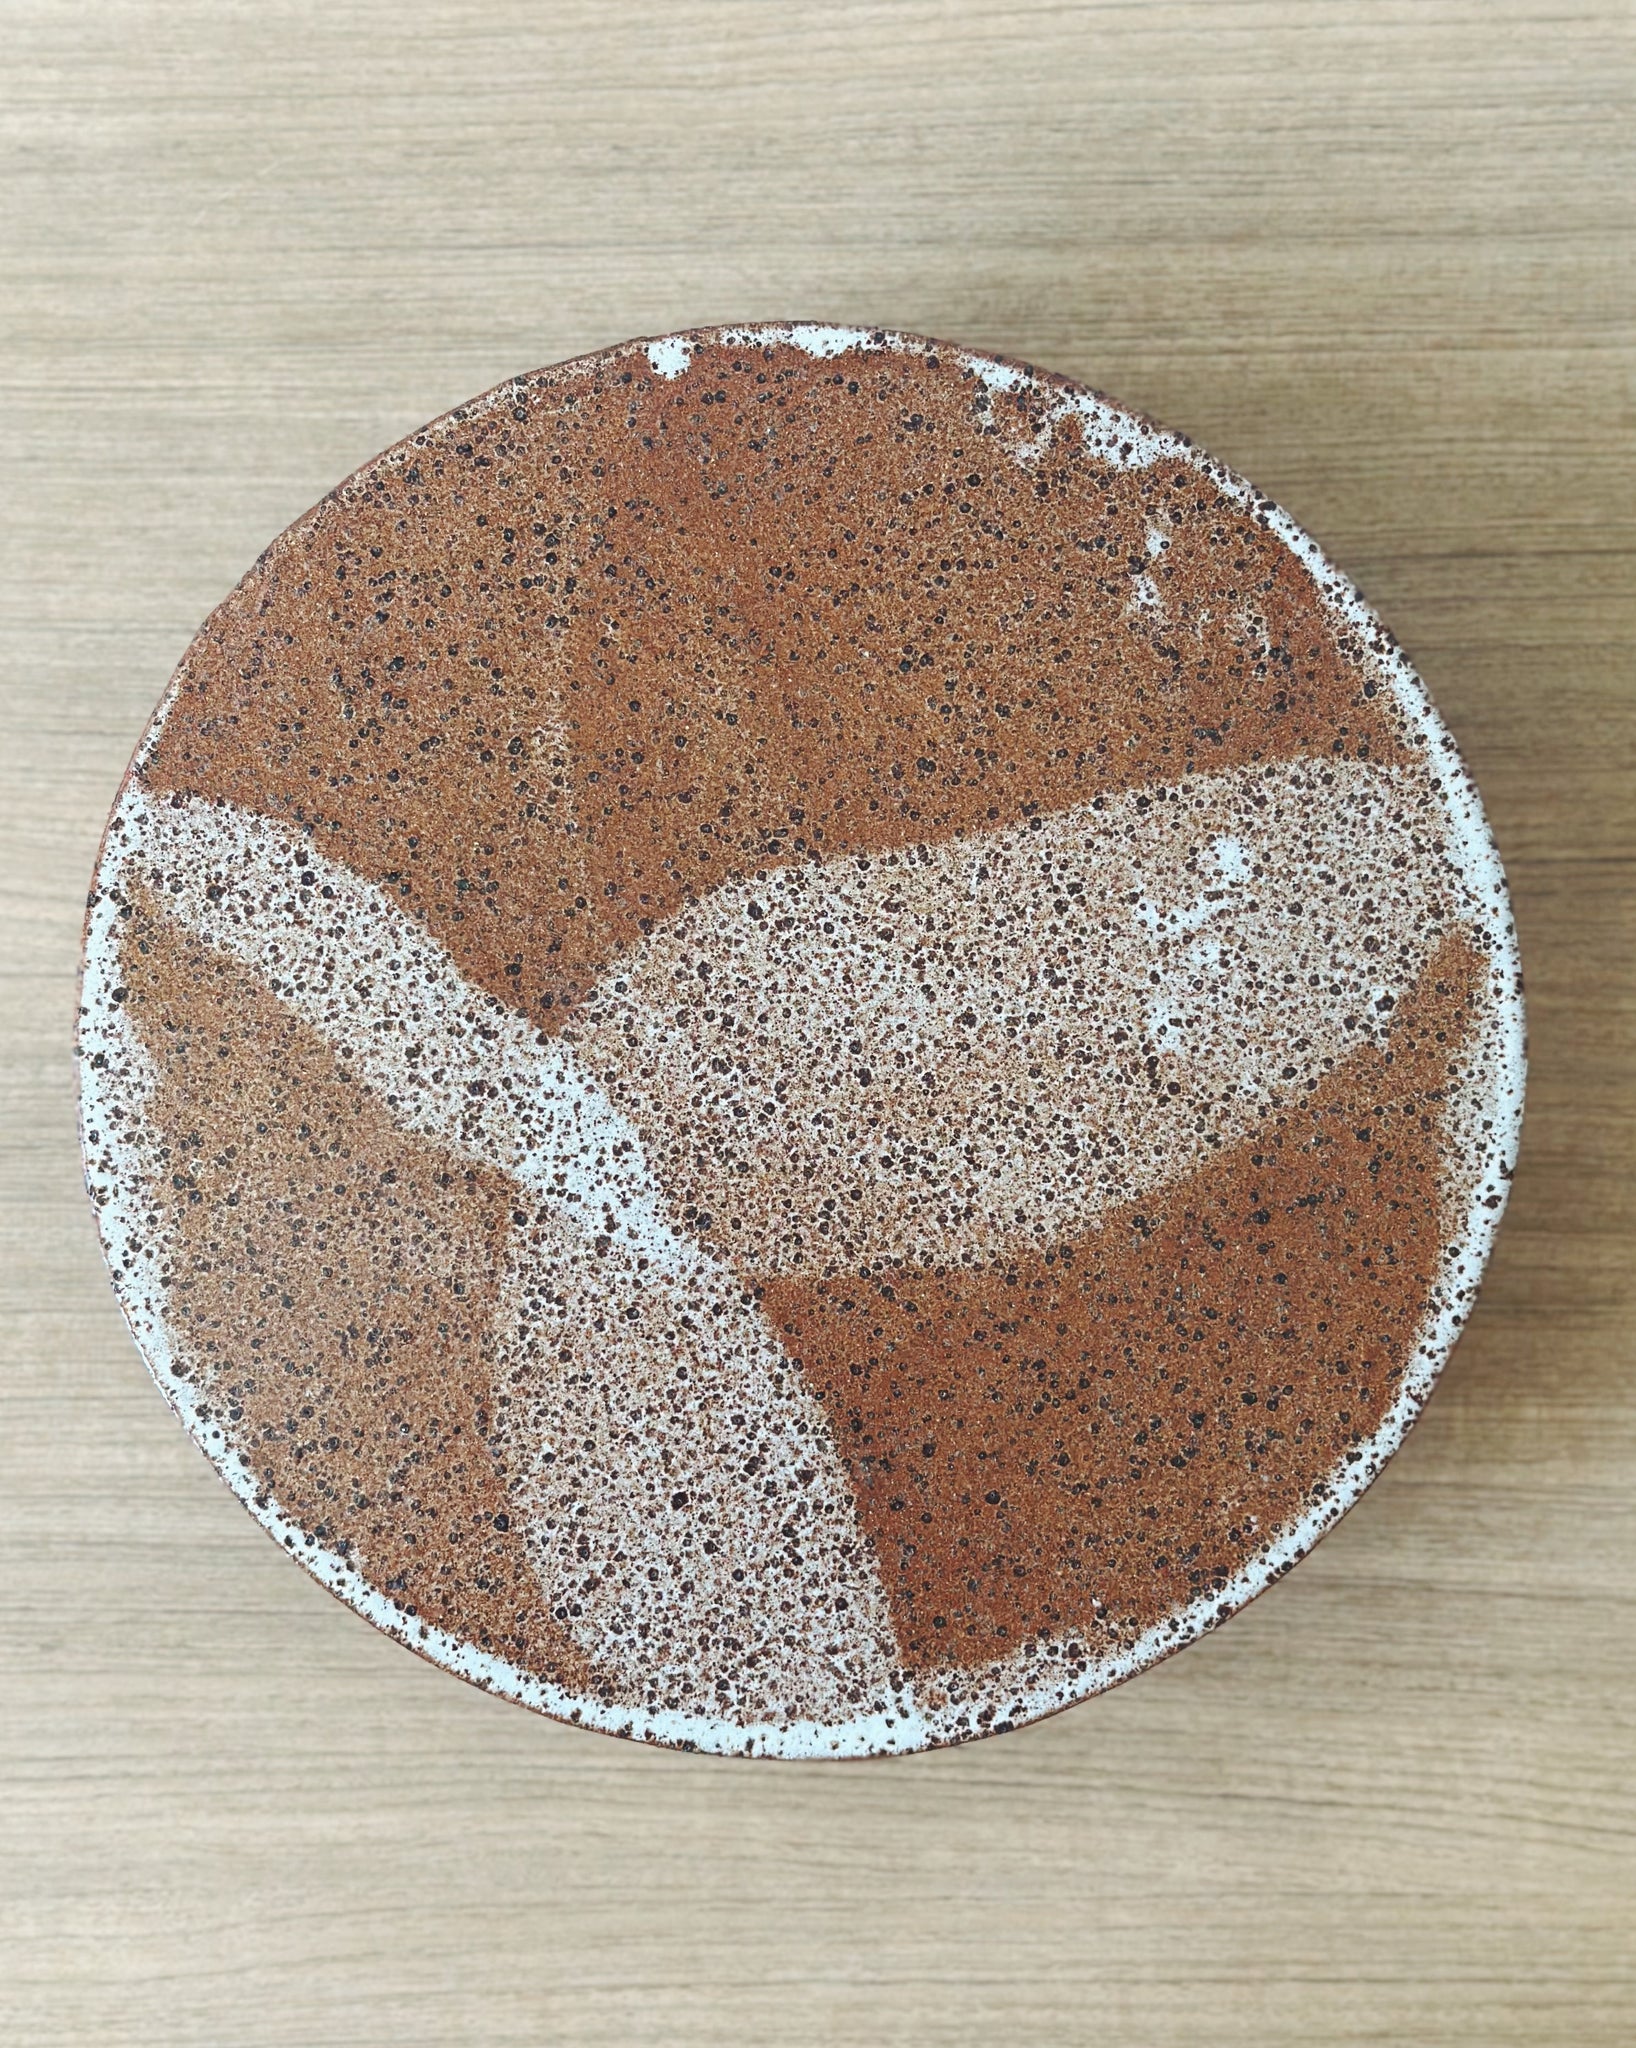 speckled cake stand